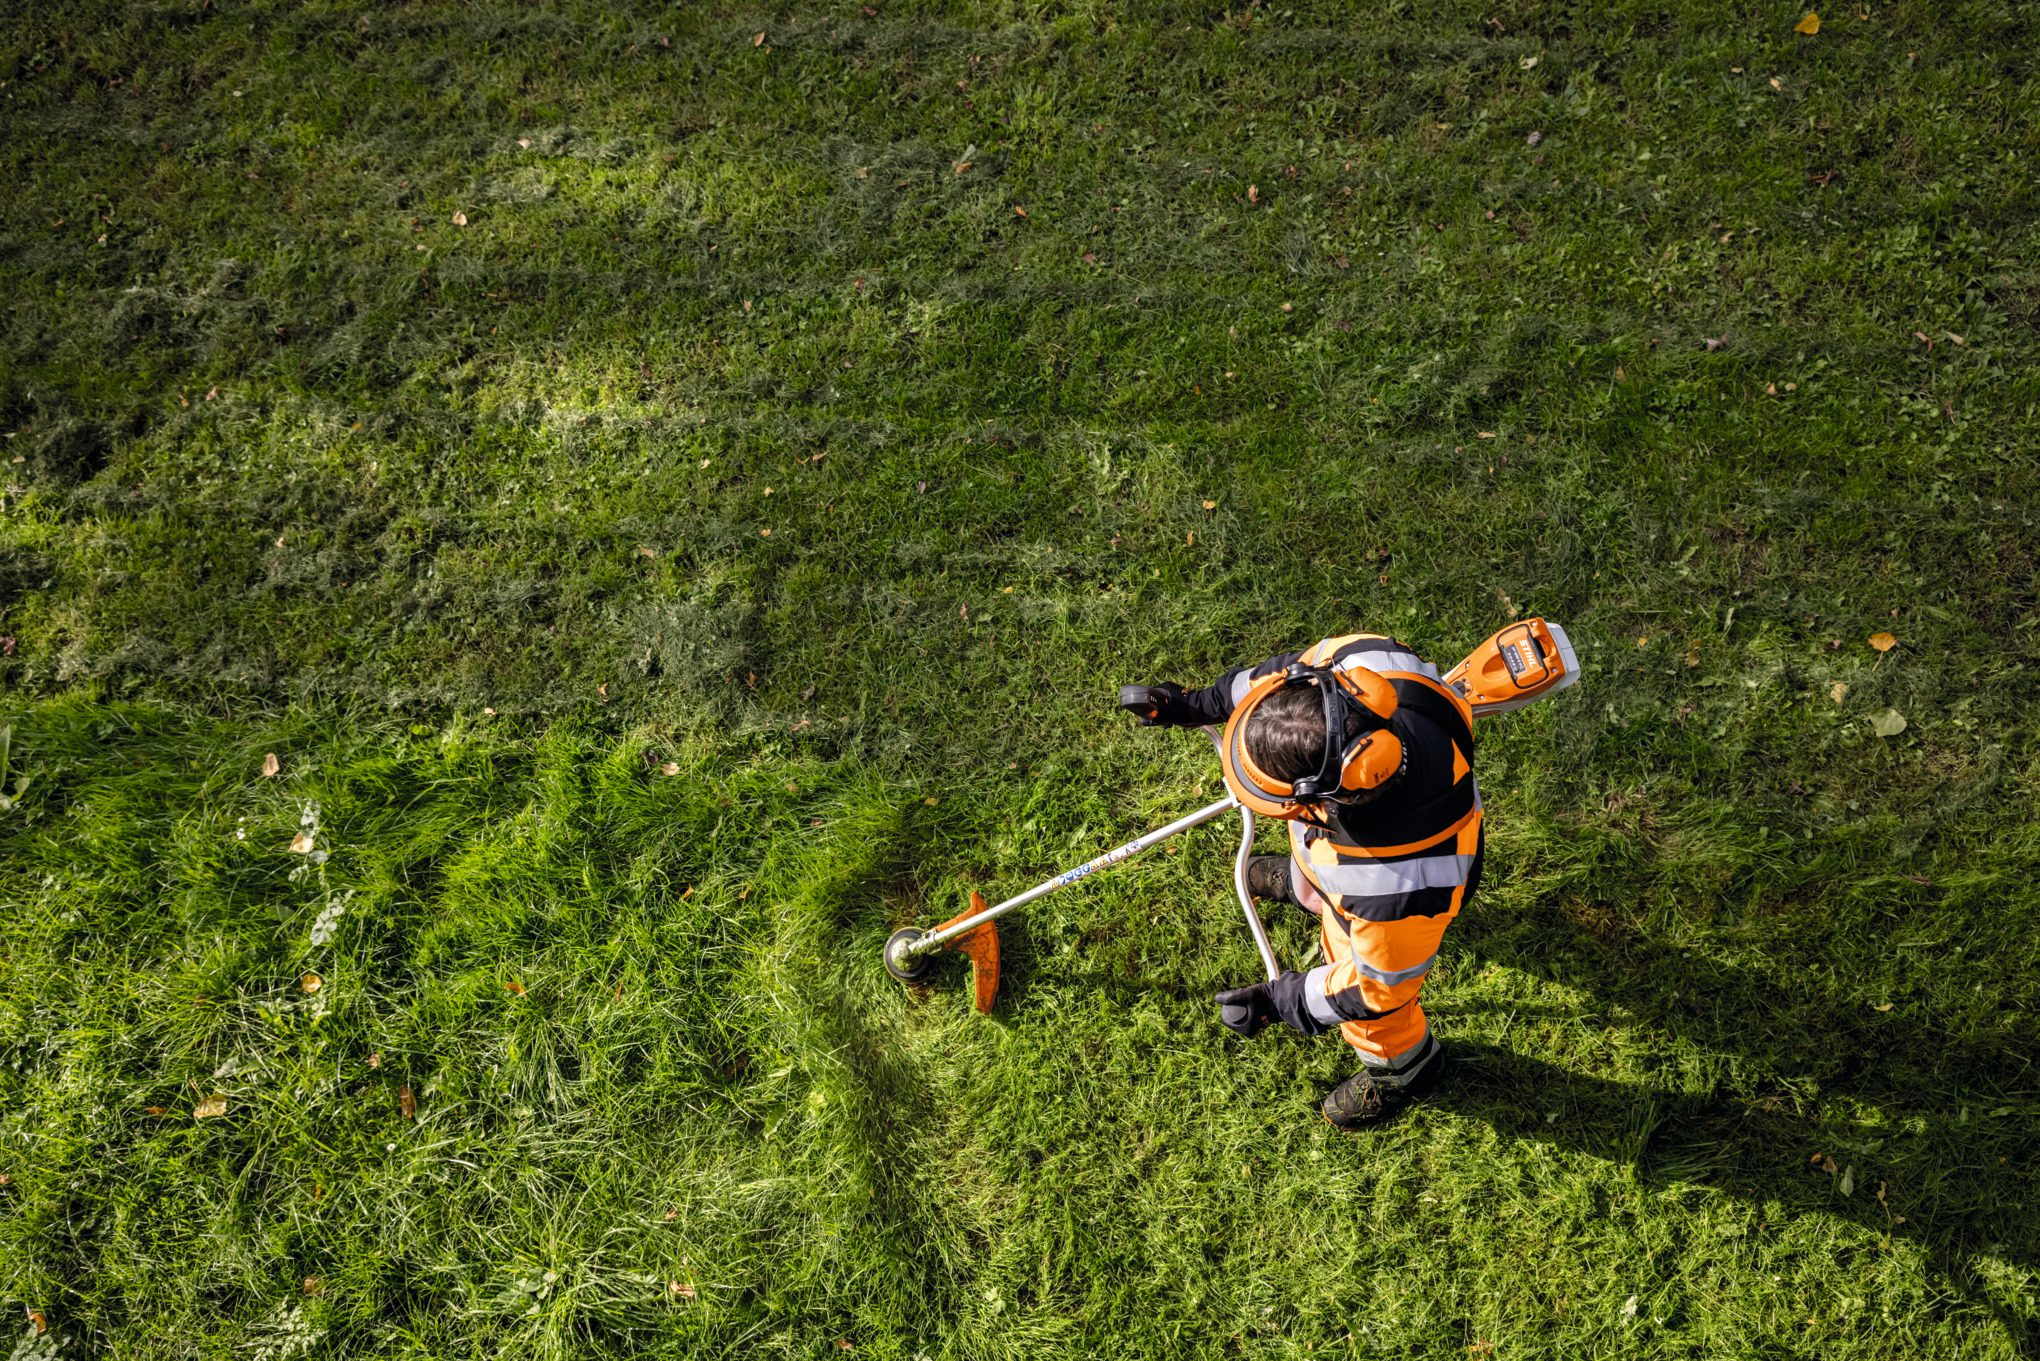 STIHL FSA 135 battery brushcutter from the AP-System